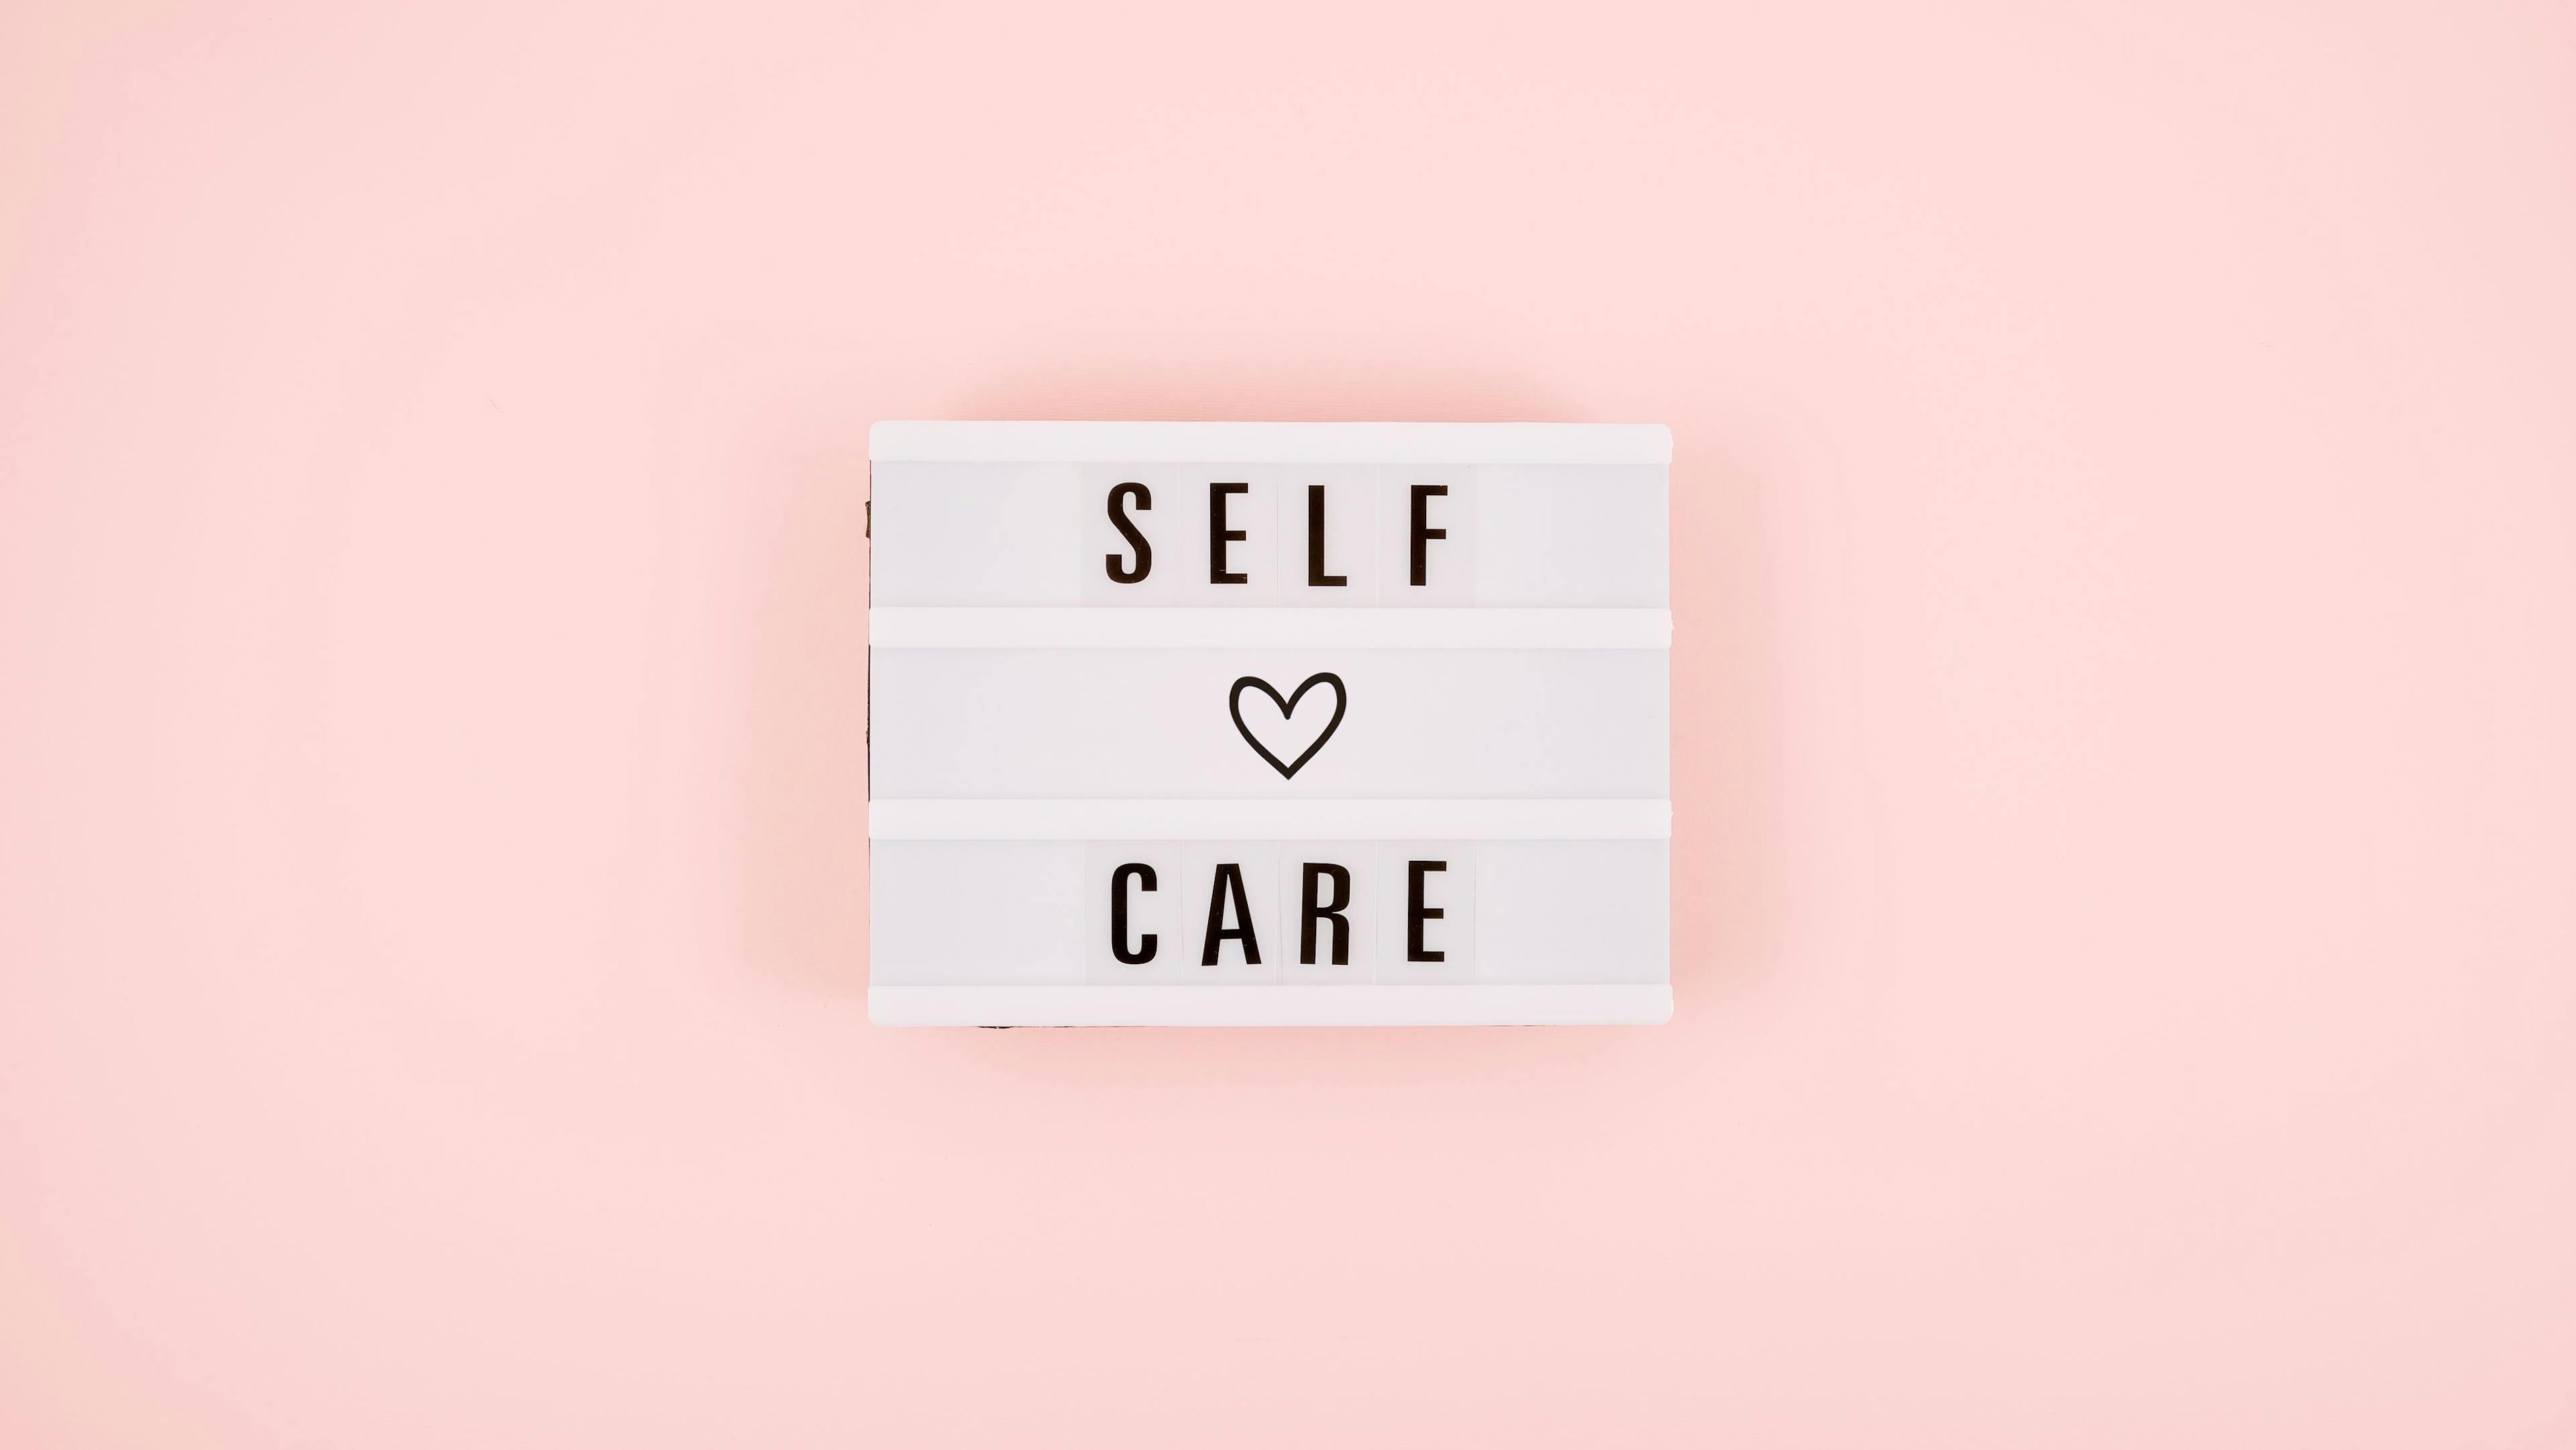 self care sign pink background